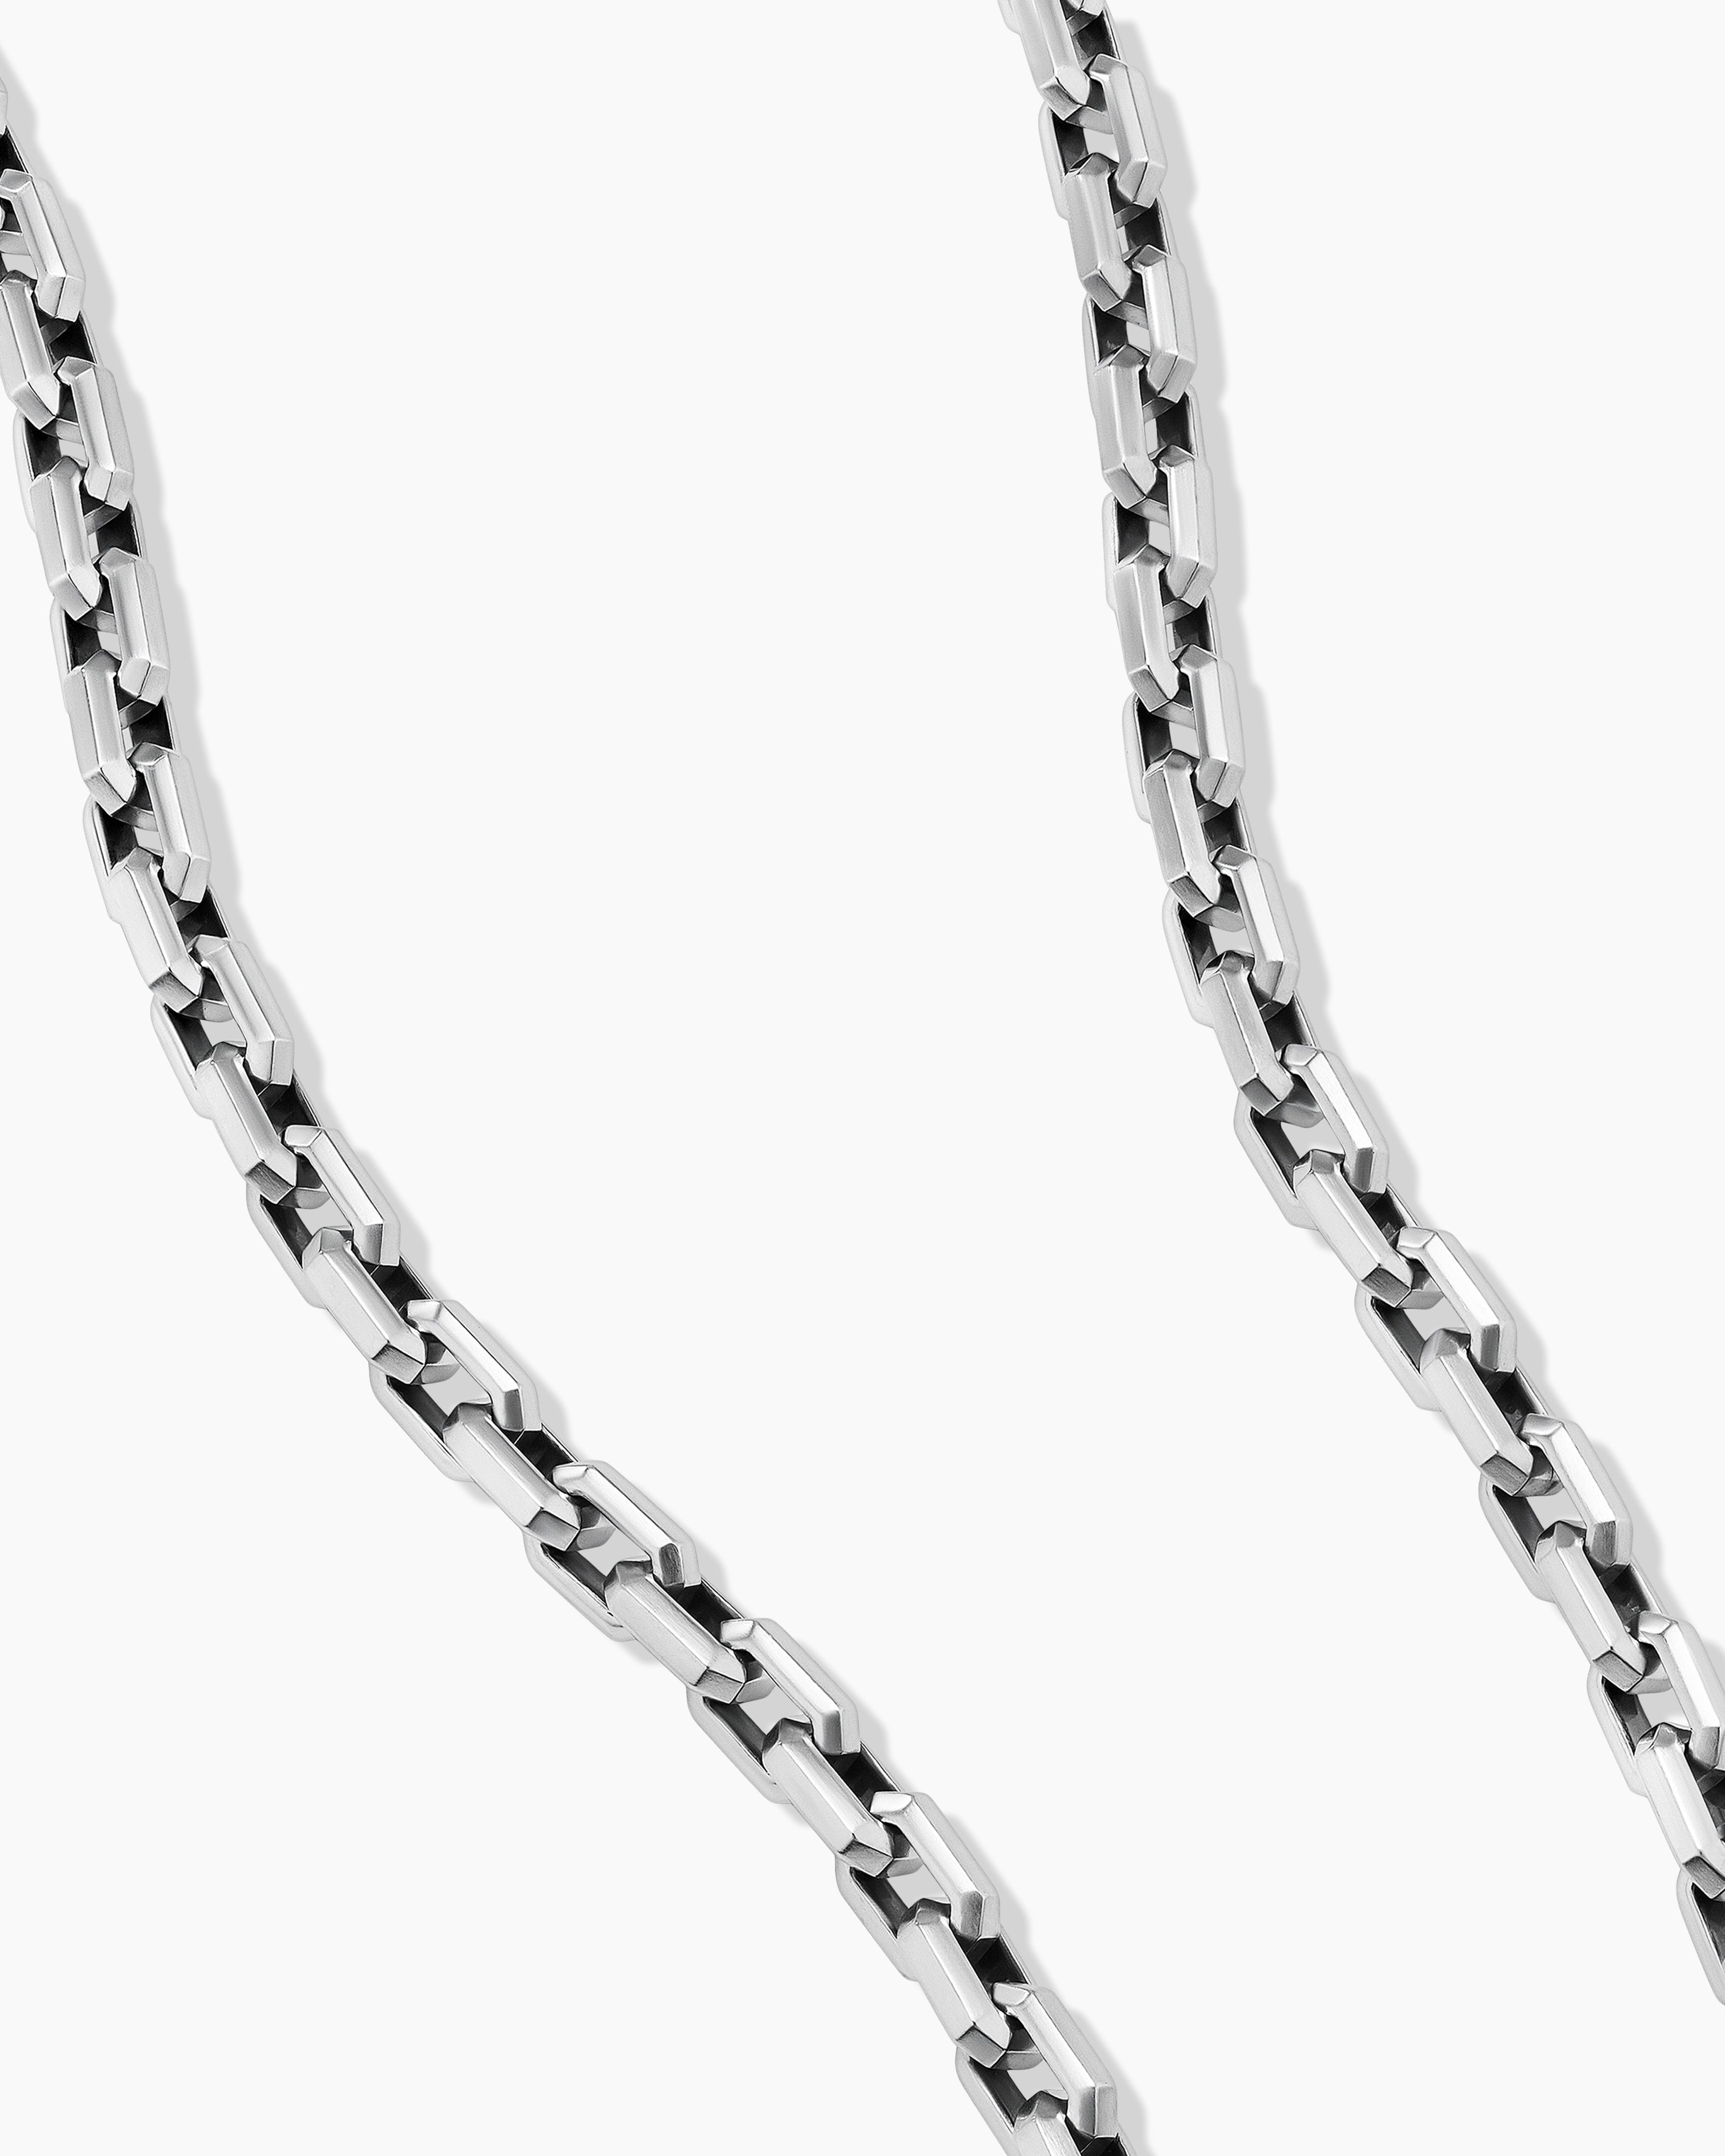 Buy Silkies Necklaces (Pack of 12) at S&S Worldwide